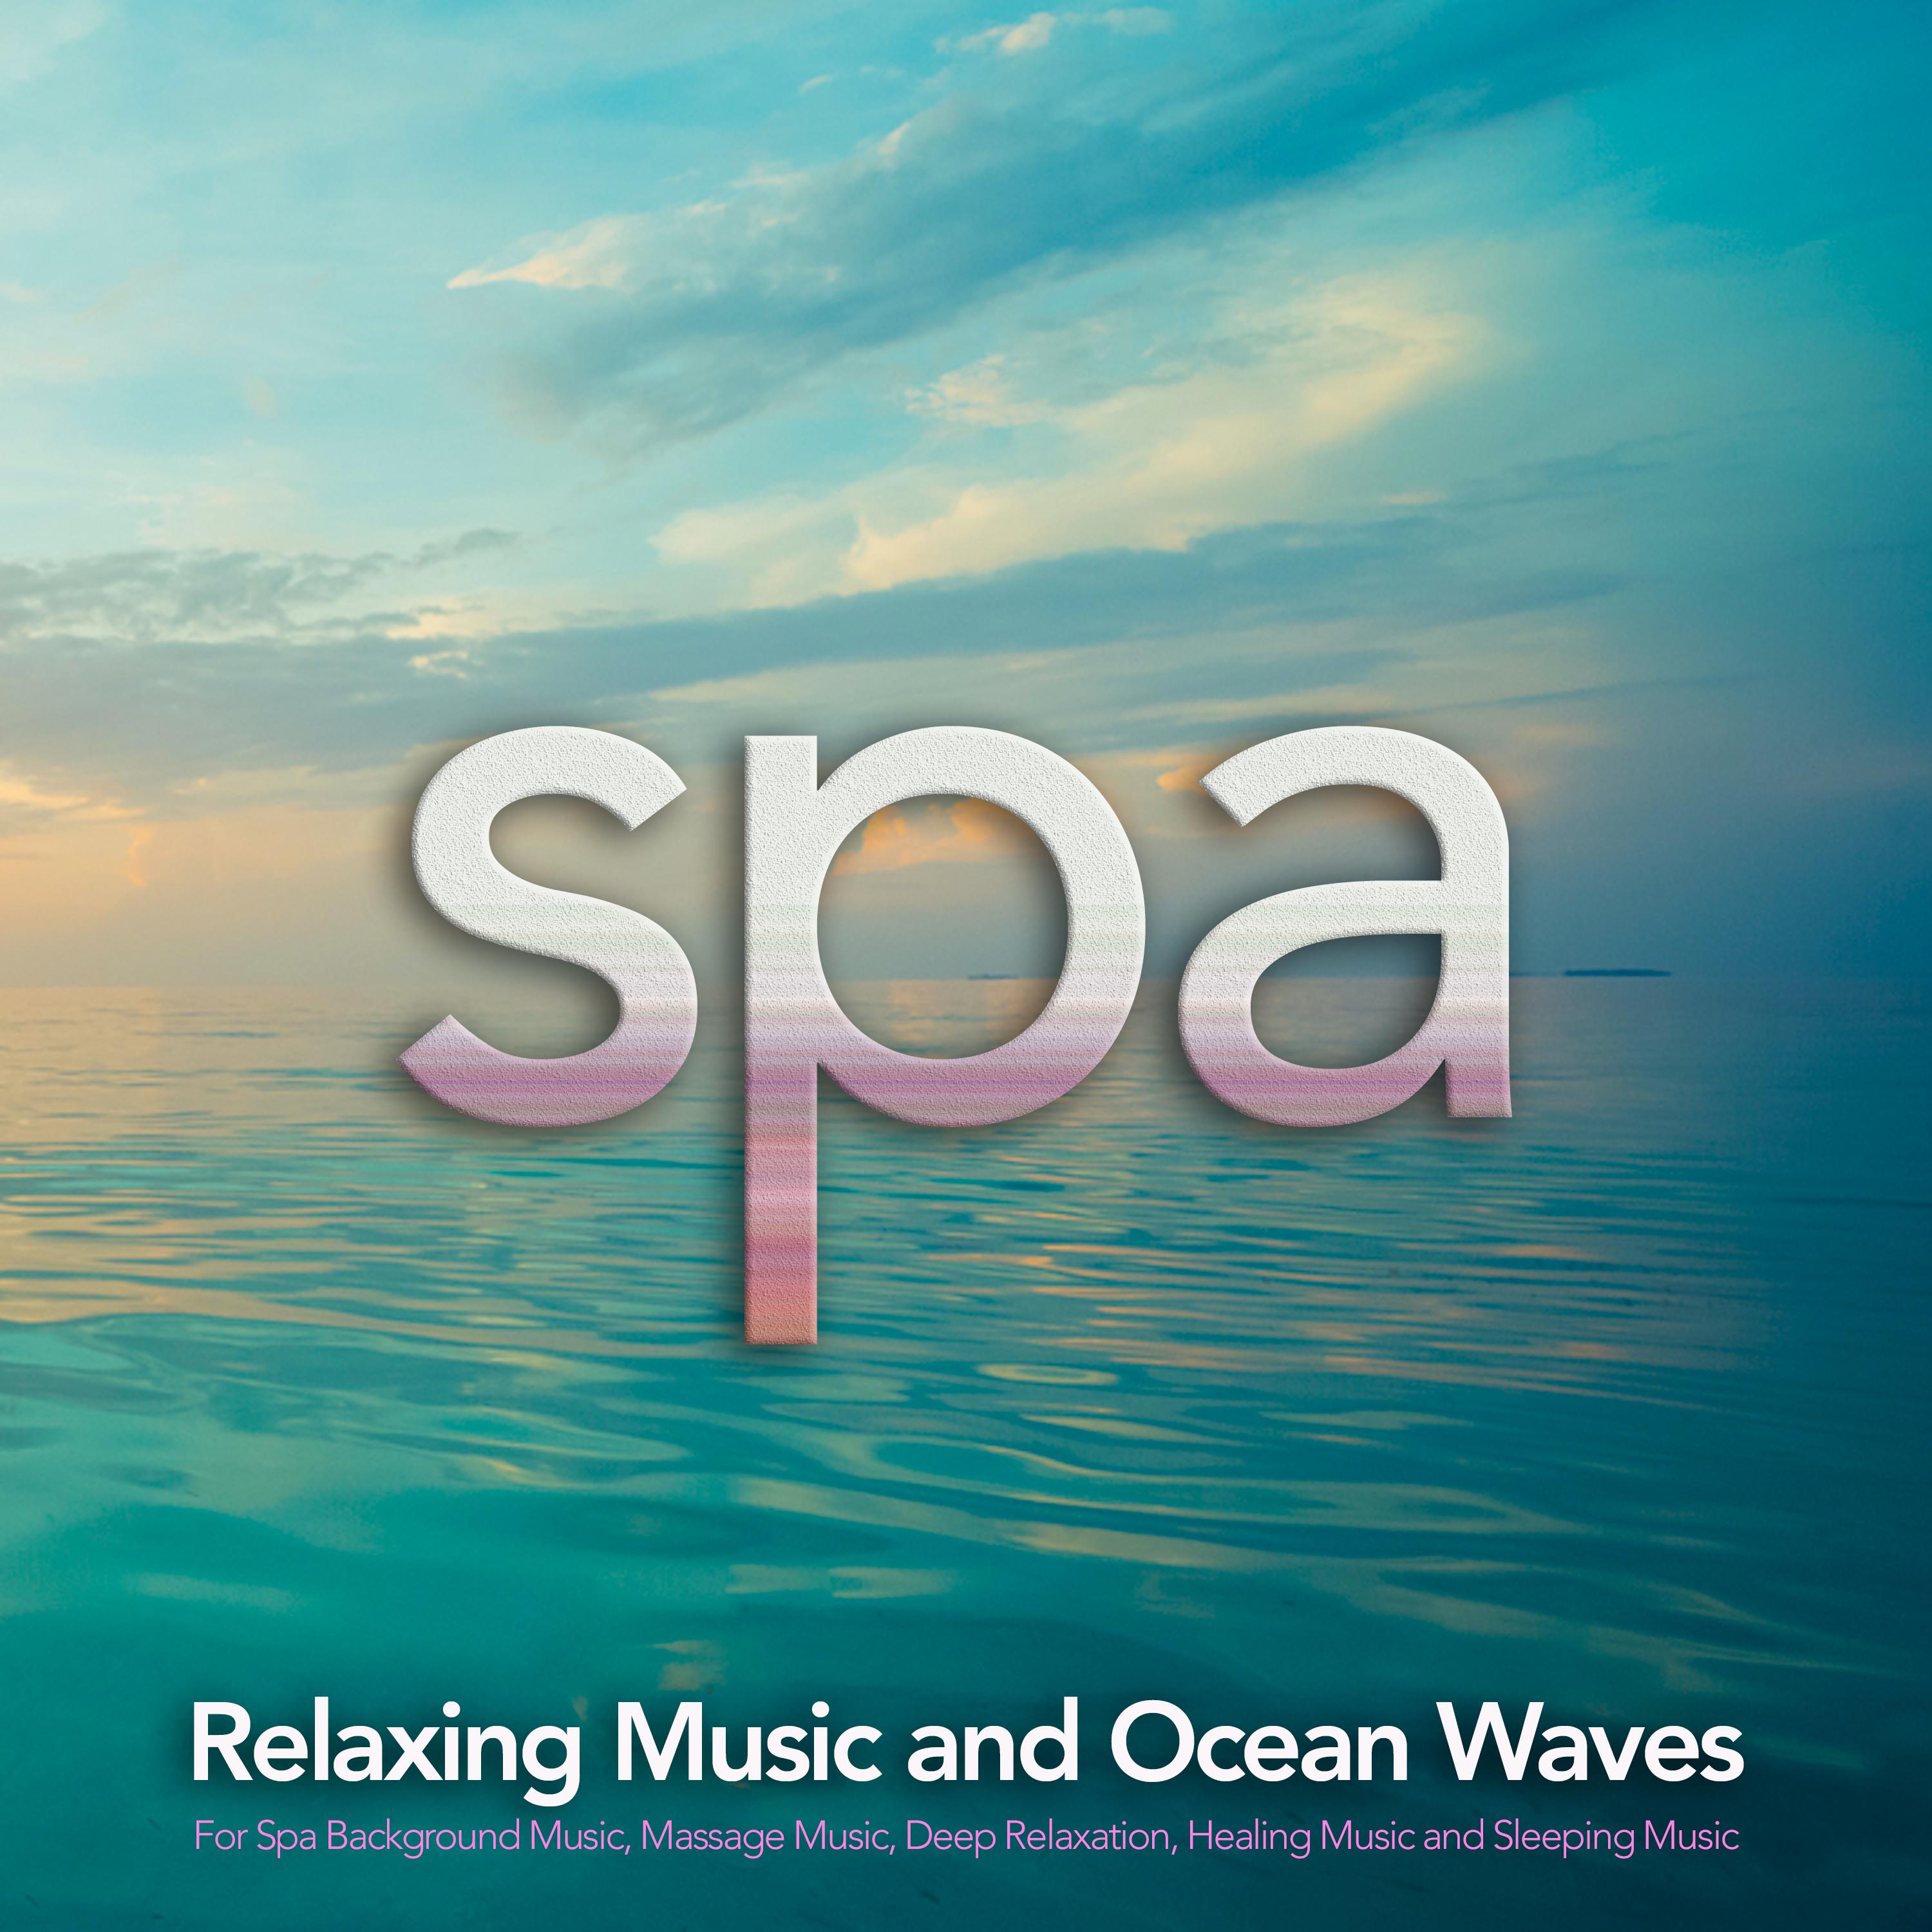 Spa Music: Relaxing Music and Ocean Waves For Spa Background Music, Massage Music, Deep Relaxation, Healing Music and Sleeping Music